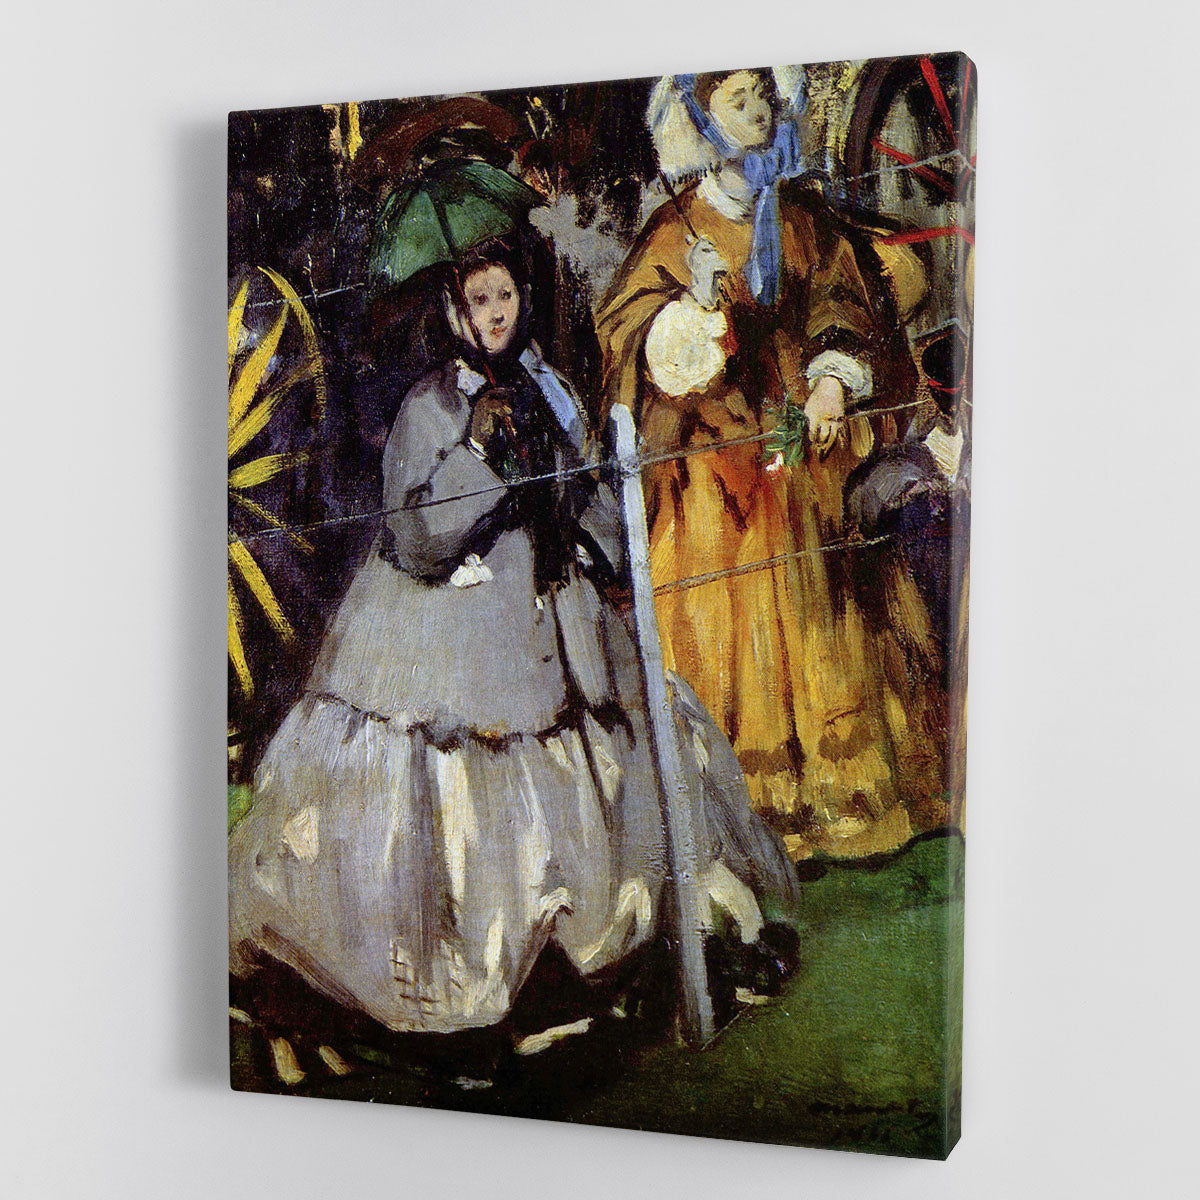 Spectators at the races by Manet Canvas Print or Poster - Canvas Art Rocks - 1